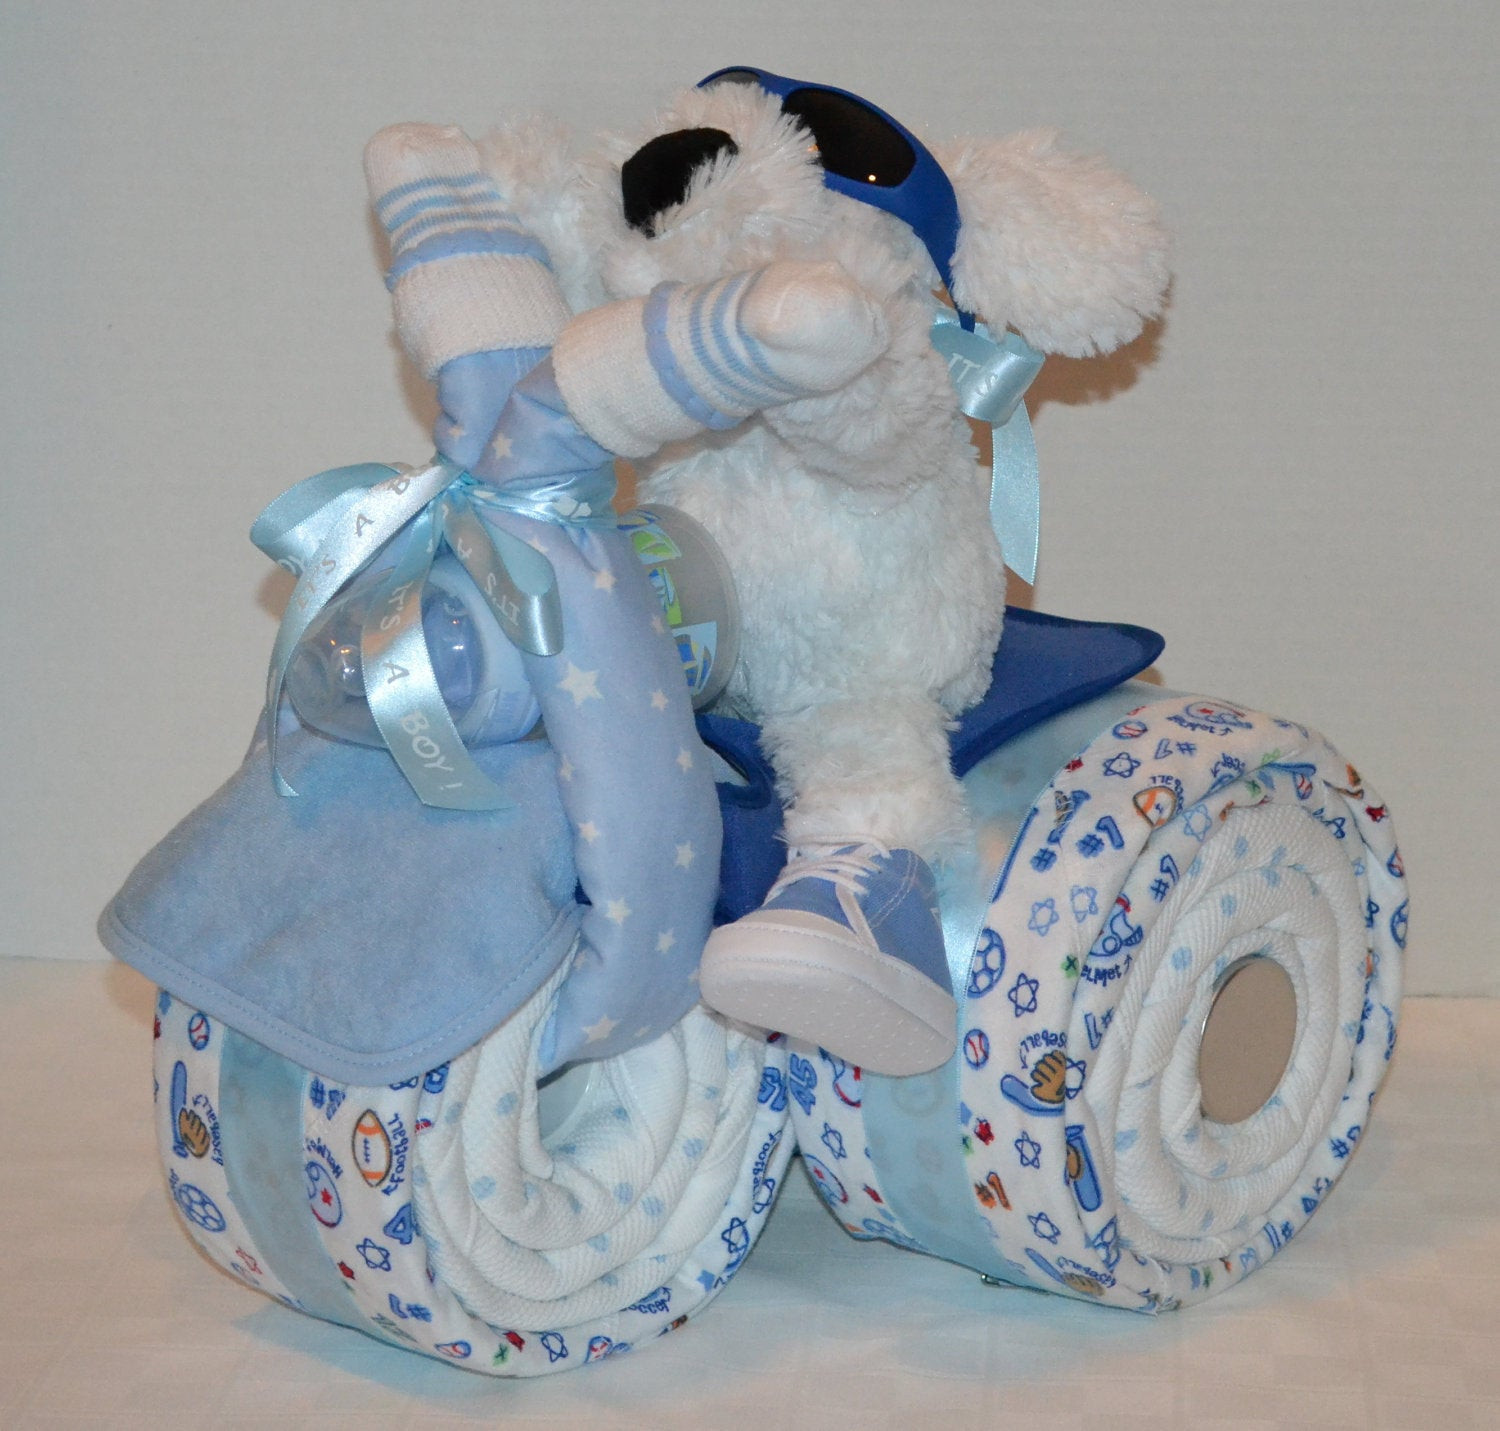 Diaper Baby Shower Gift Ideas
 Tricycle Trike Diaper Cake Baby Shower Gift Sports theme